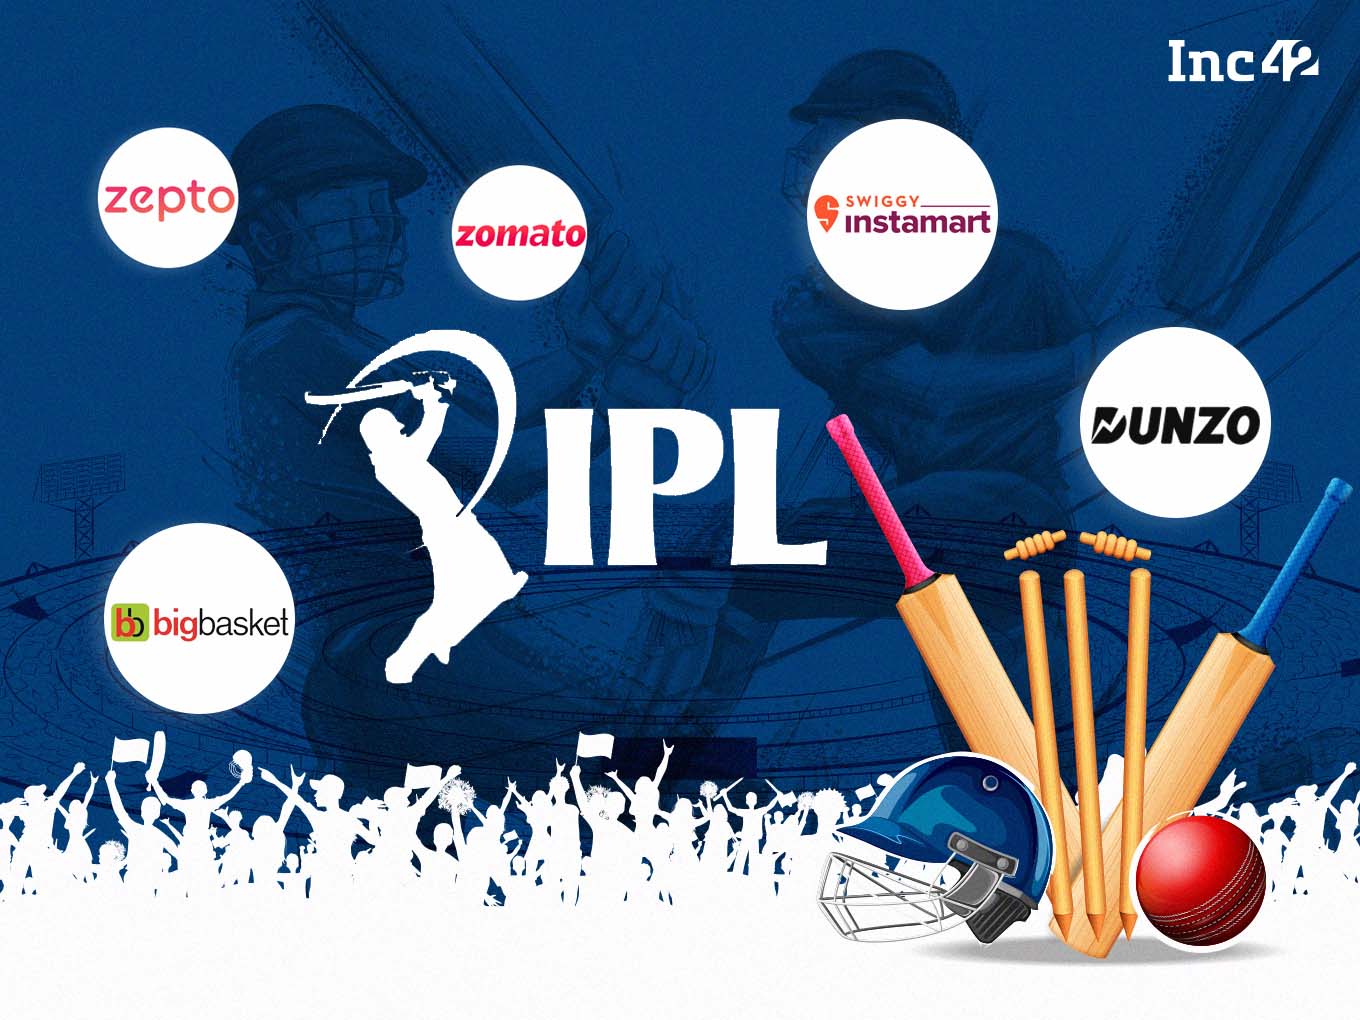 Quick Commerce Goes Gung-Ho With IPL; Contributes 20-25% Of All IPL Ad Spend